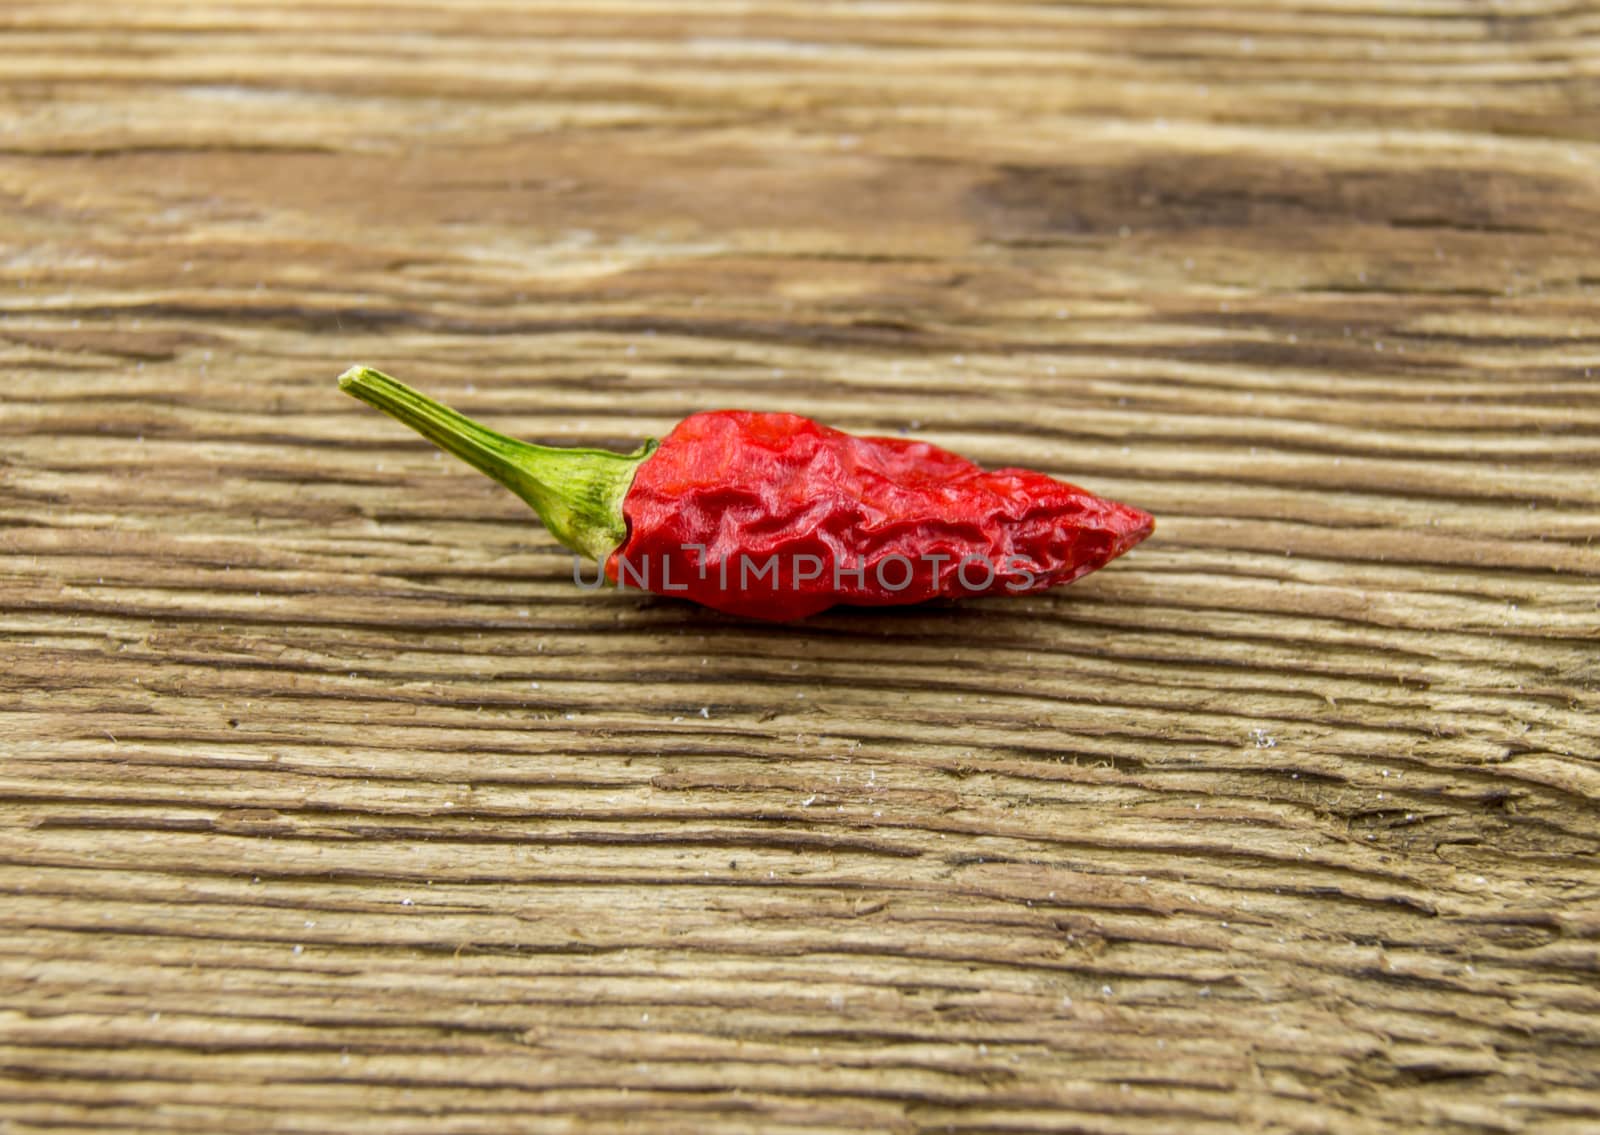 chili pepper on wood background. For your commercial and editorial use.